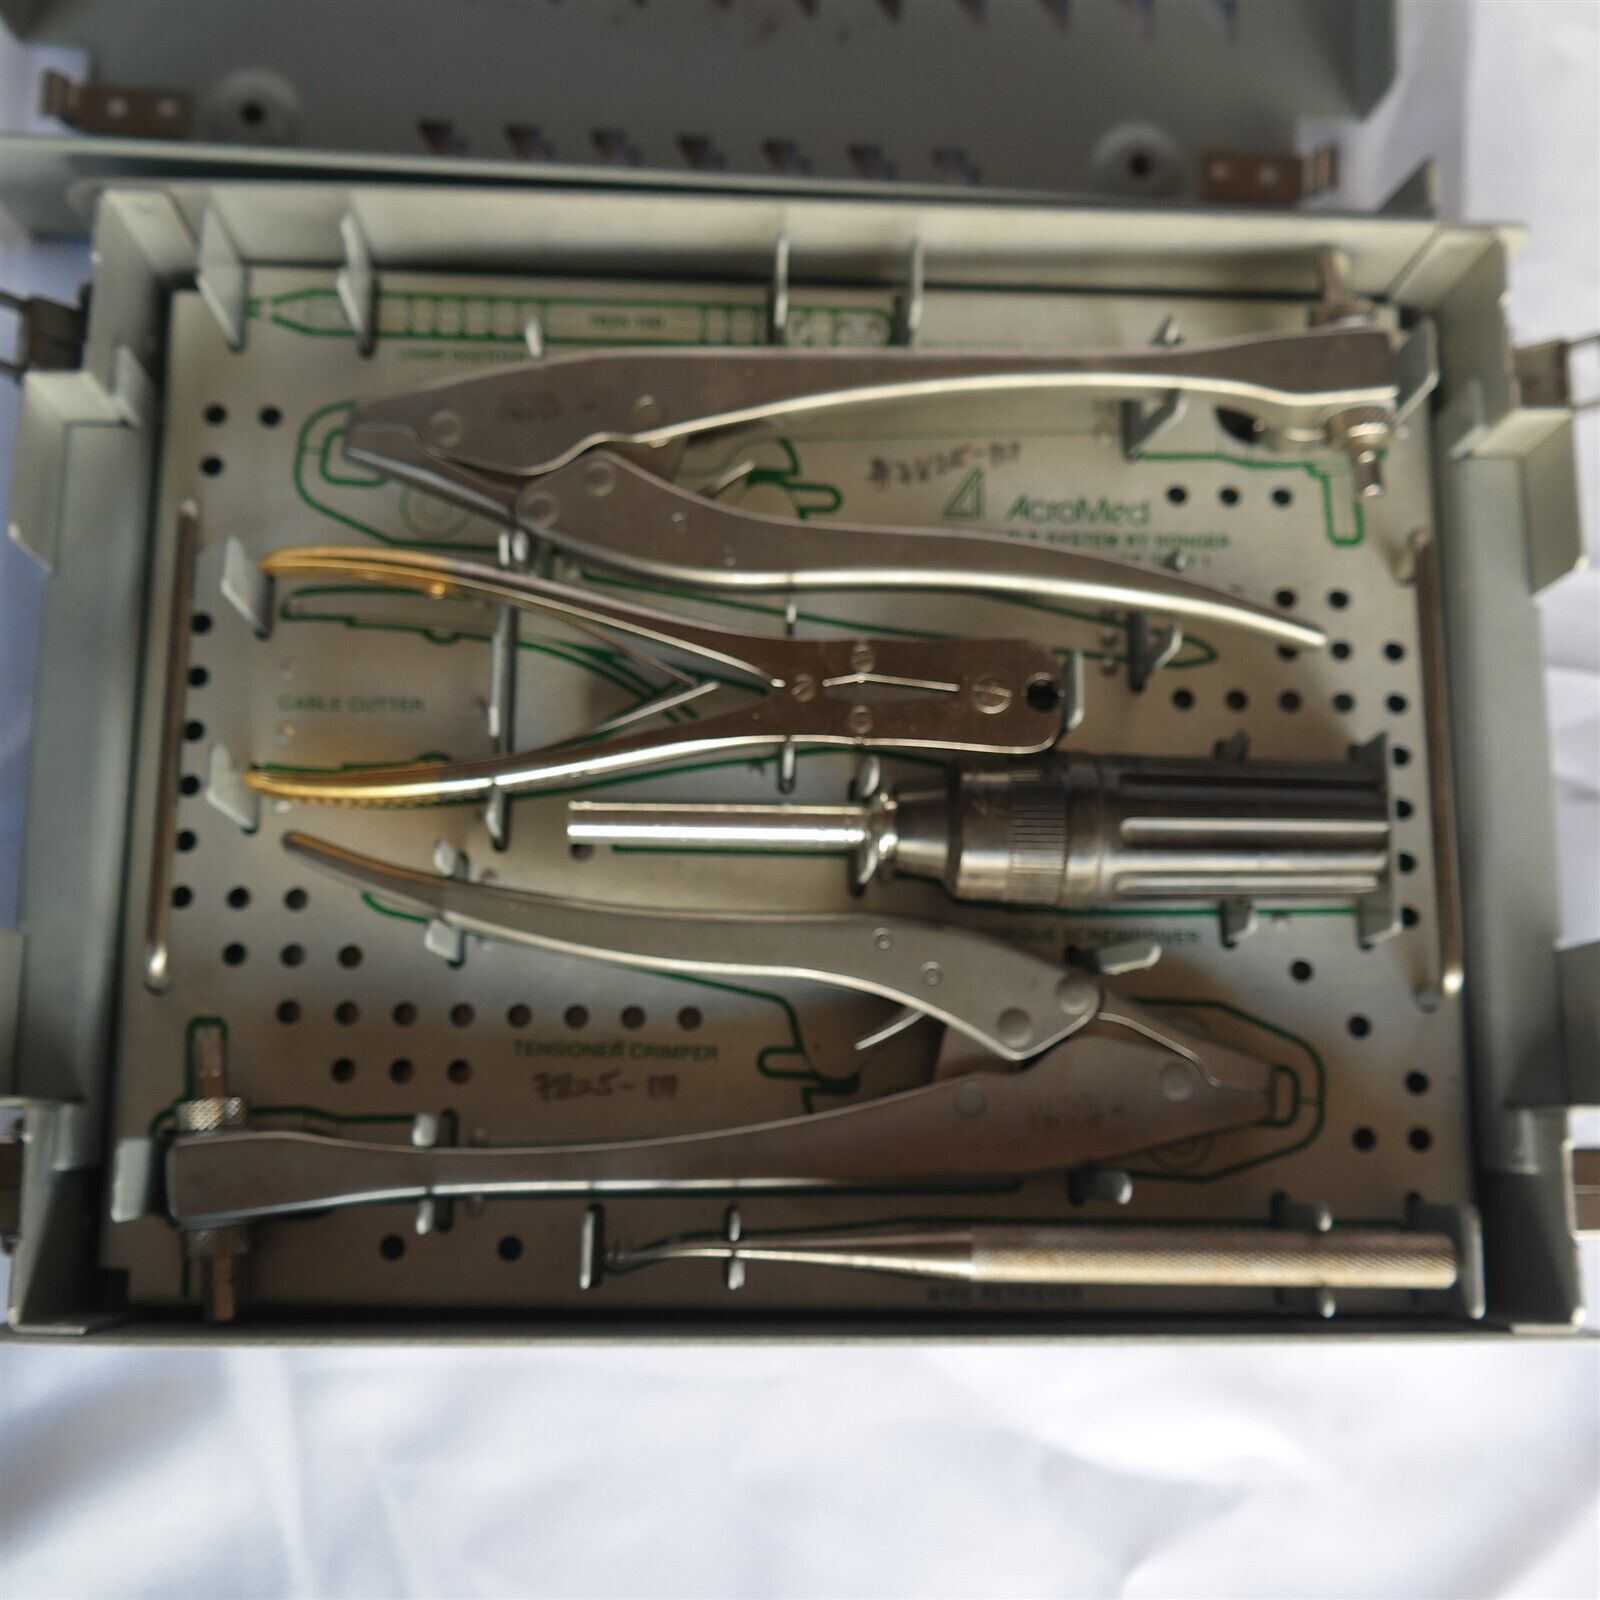 AcroMed Cable System by Songer Implant instrument case Medical tools 